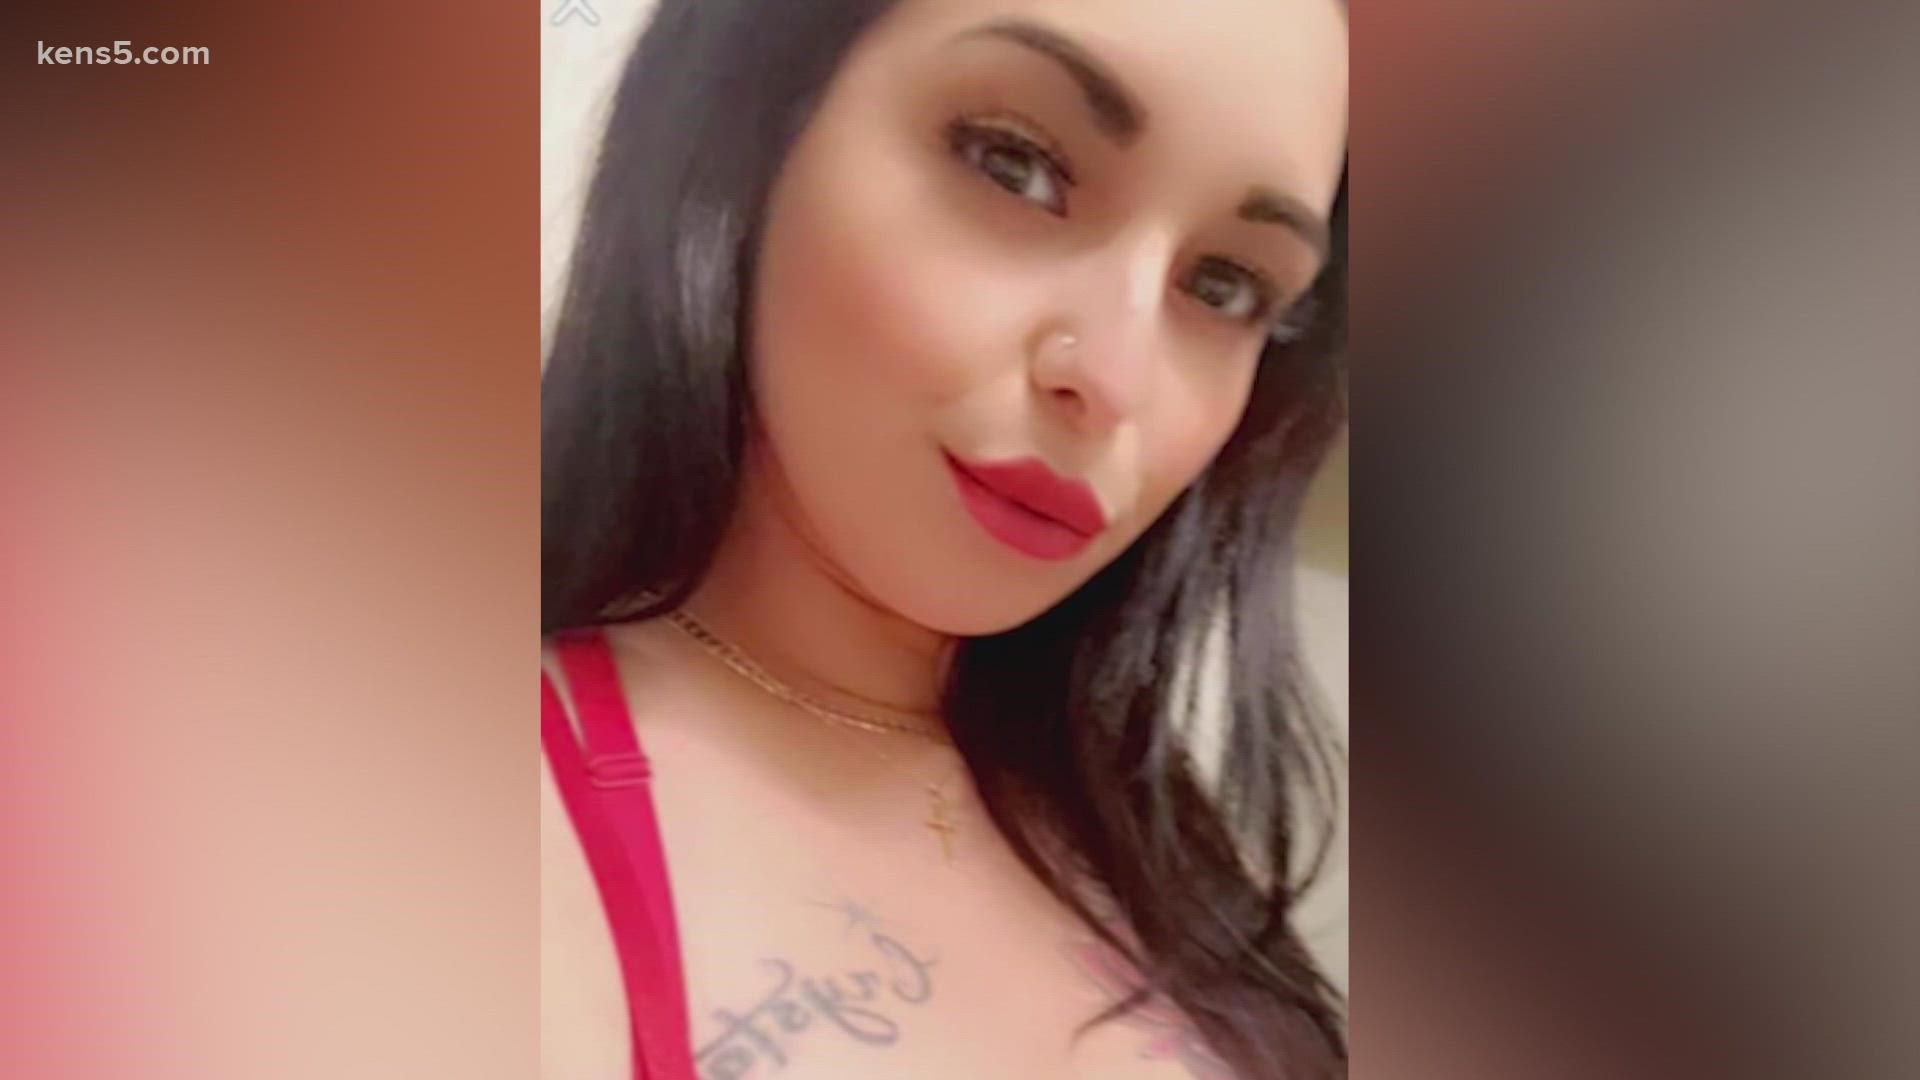 Authorities said the remains were found in Comal County, and they were working to confirm if the remains belong to Crystal Garcia. A suspect is in custody.